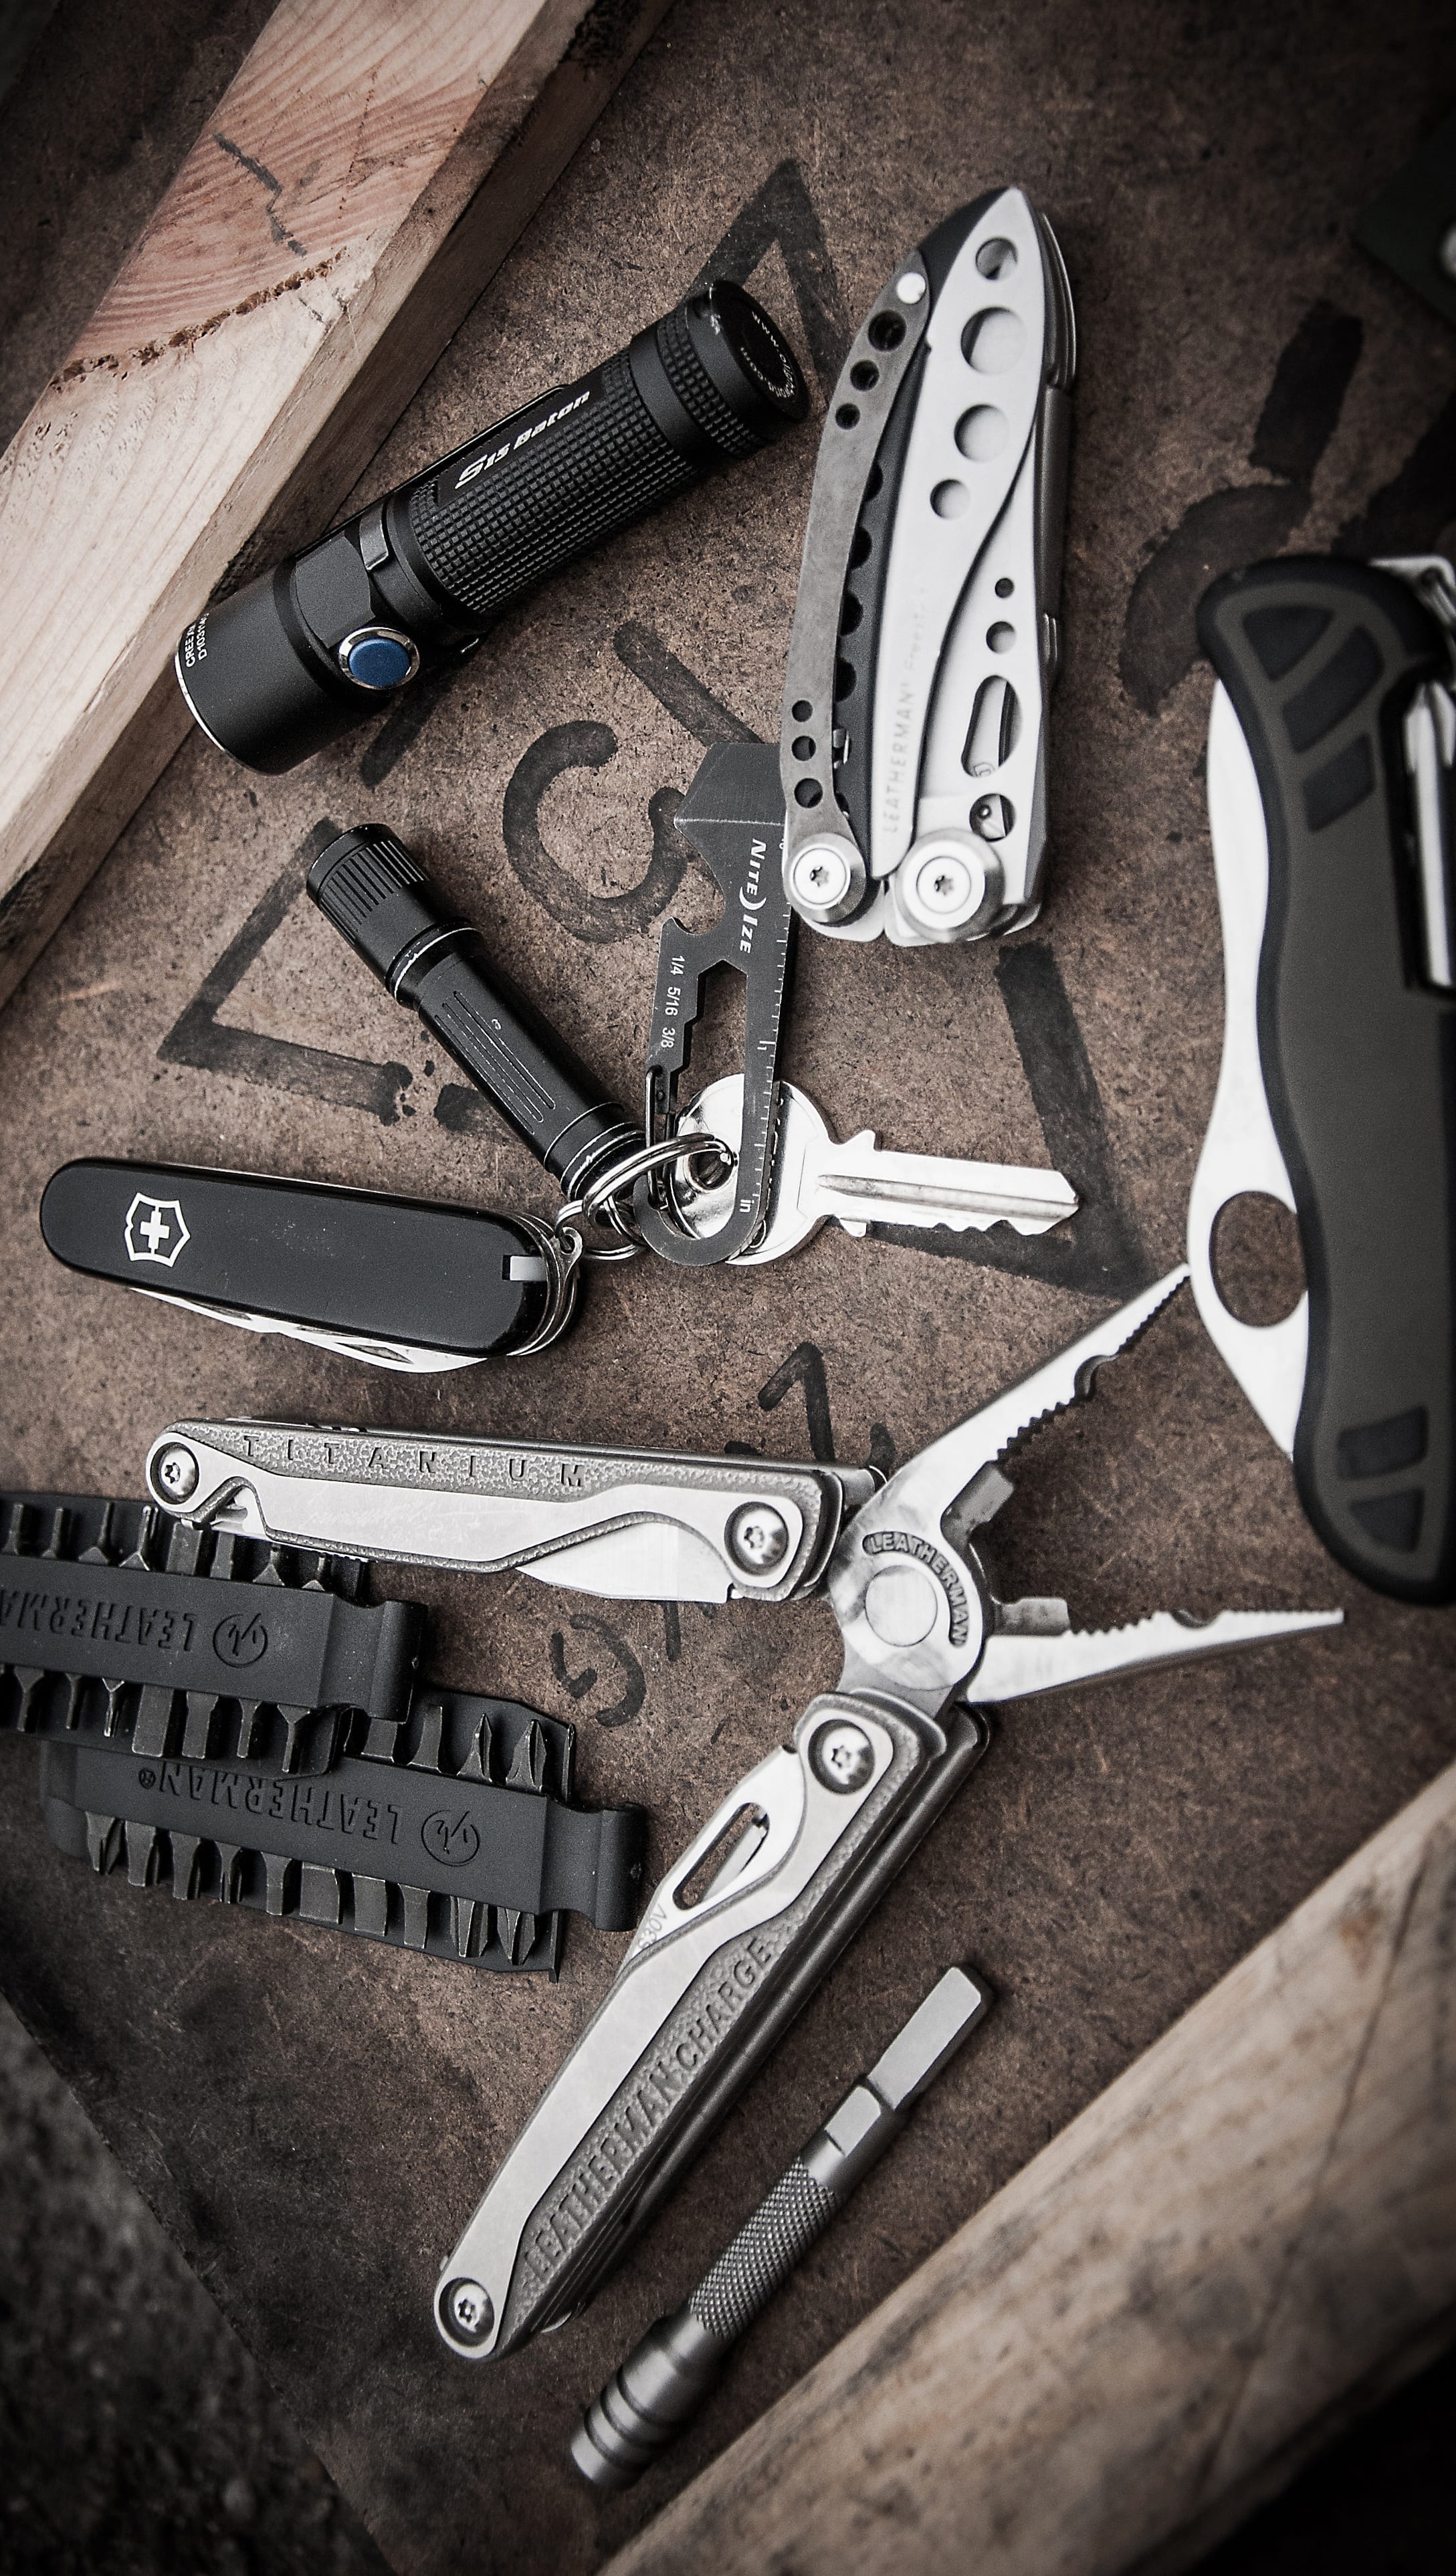 father's day gifts- EDC kit